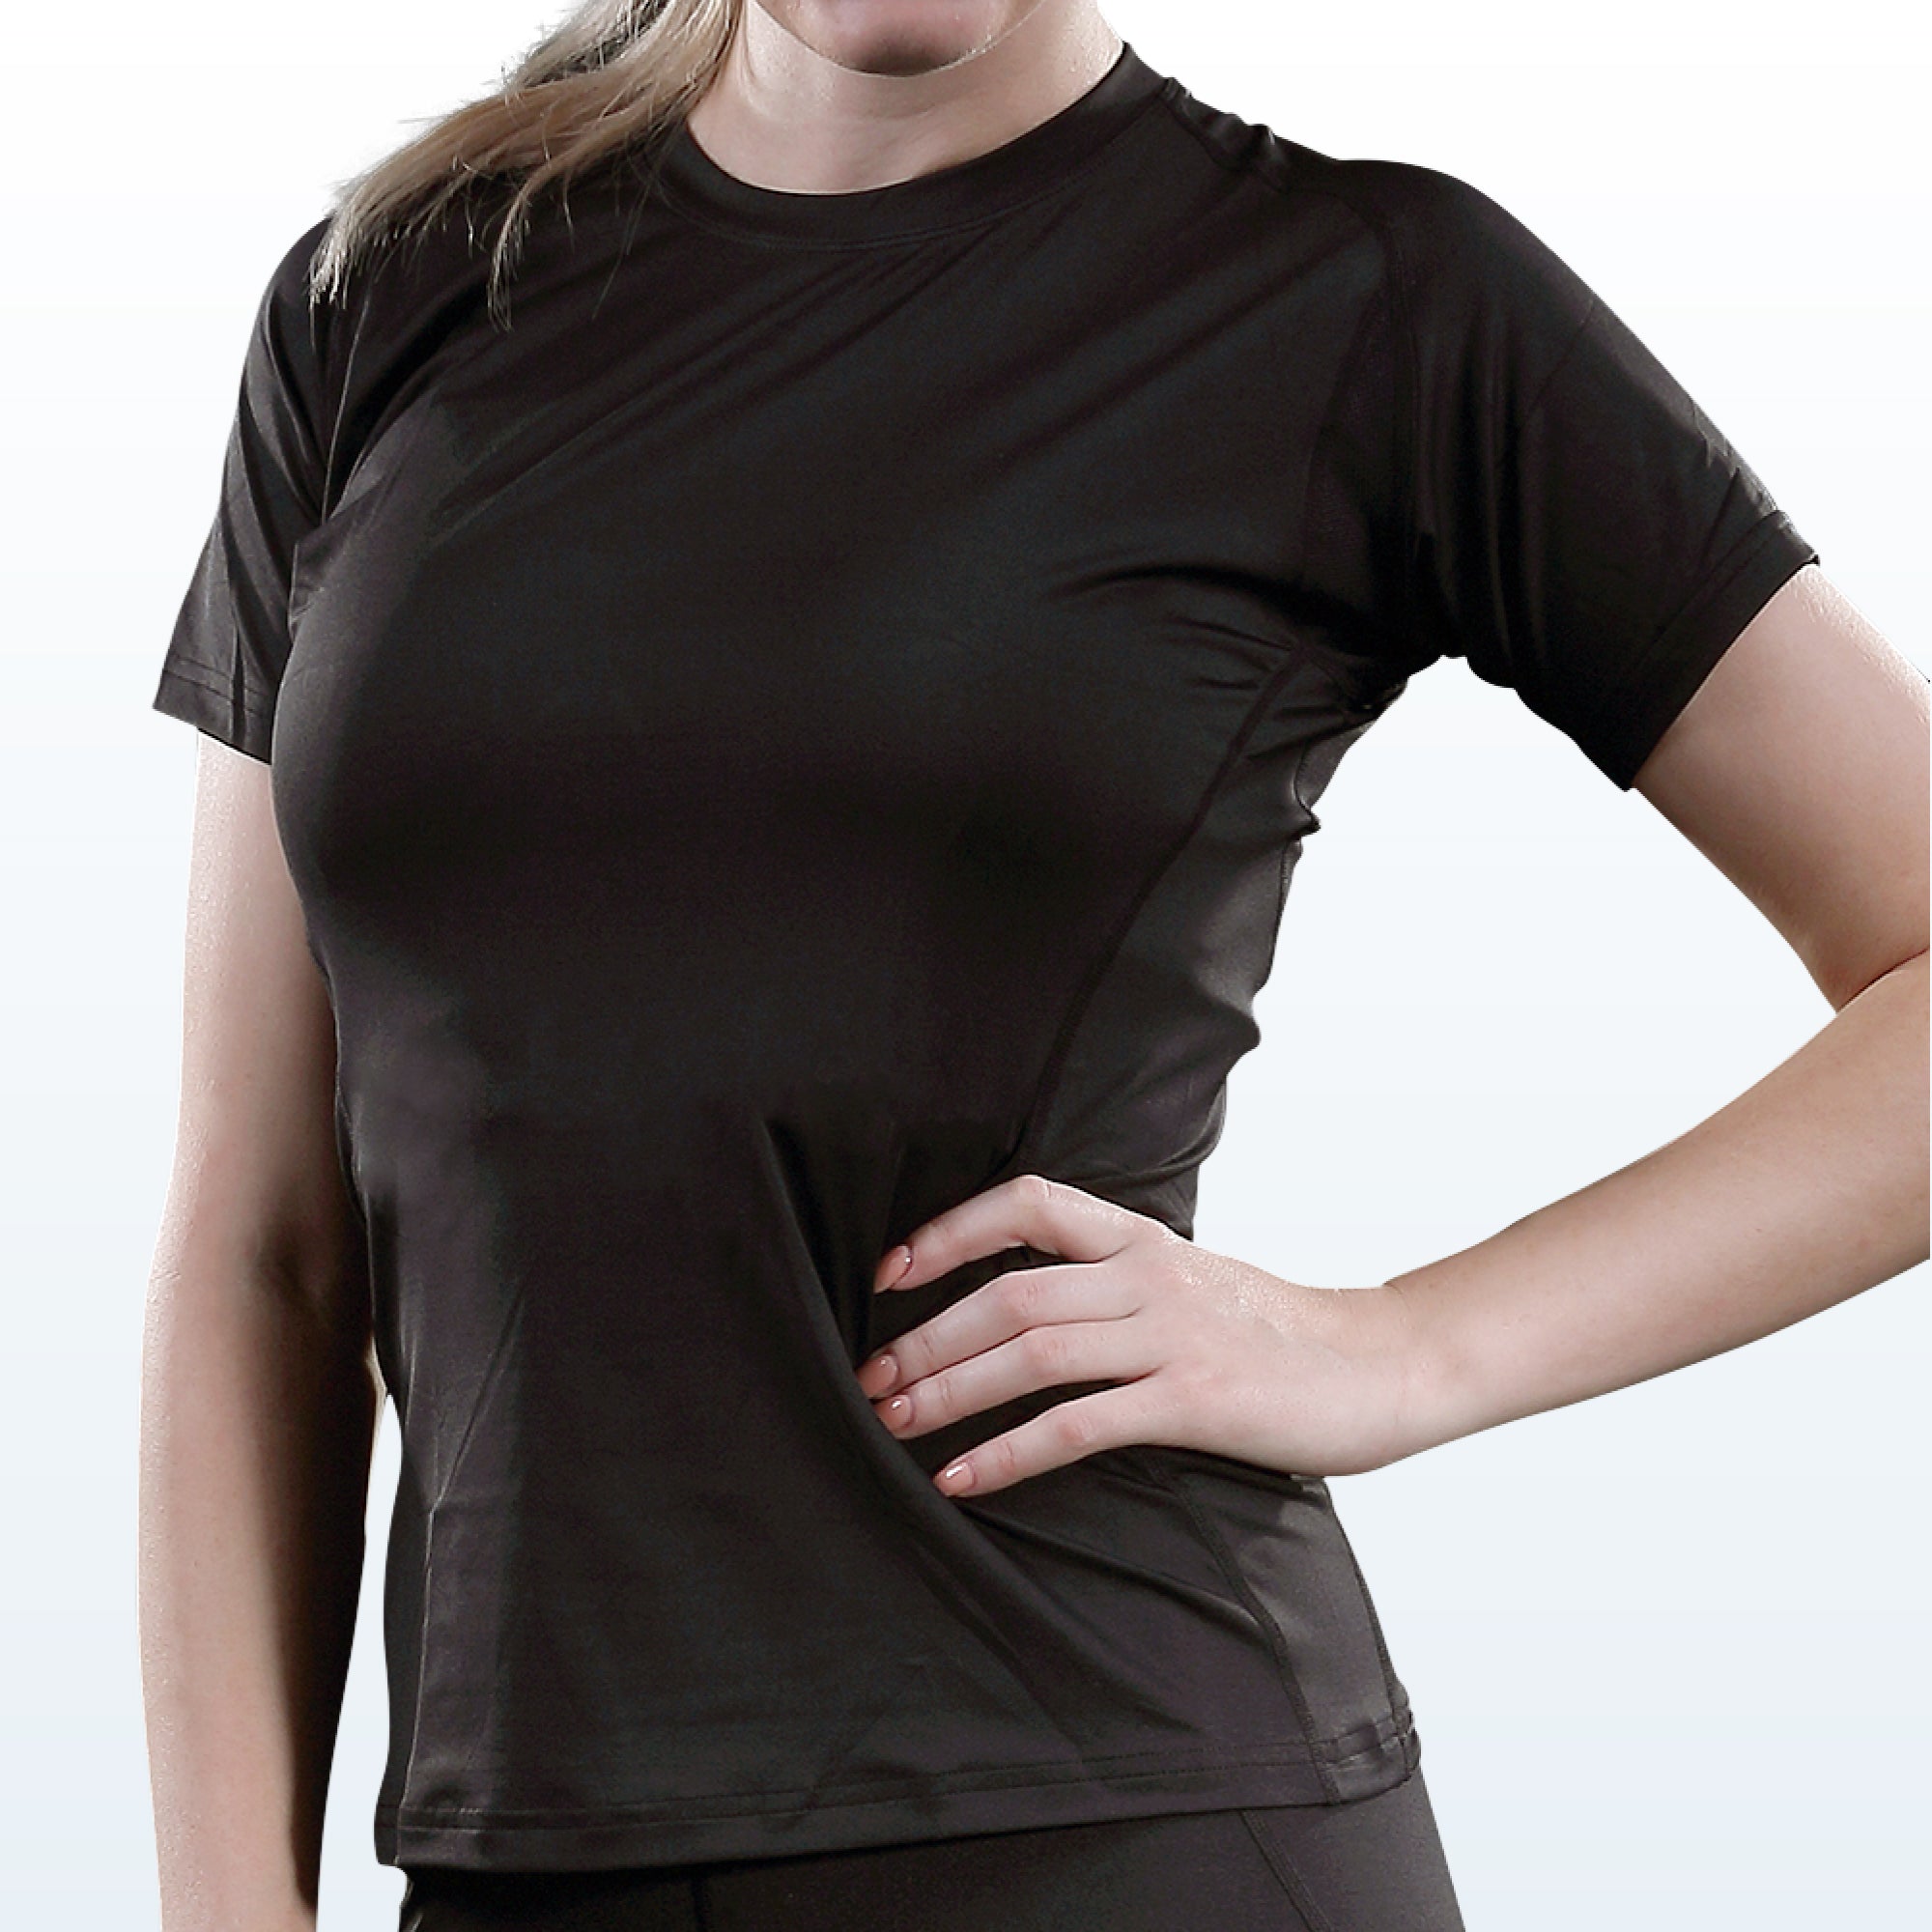 Women Compression Recovery Short Sleeve Shirt